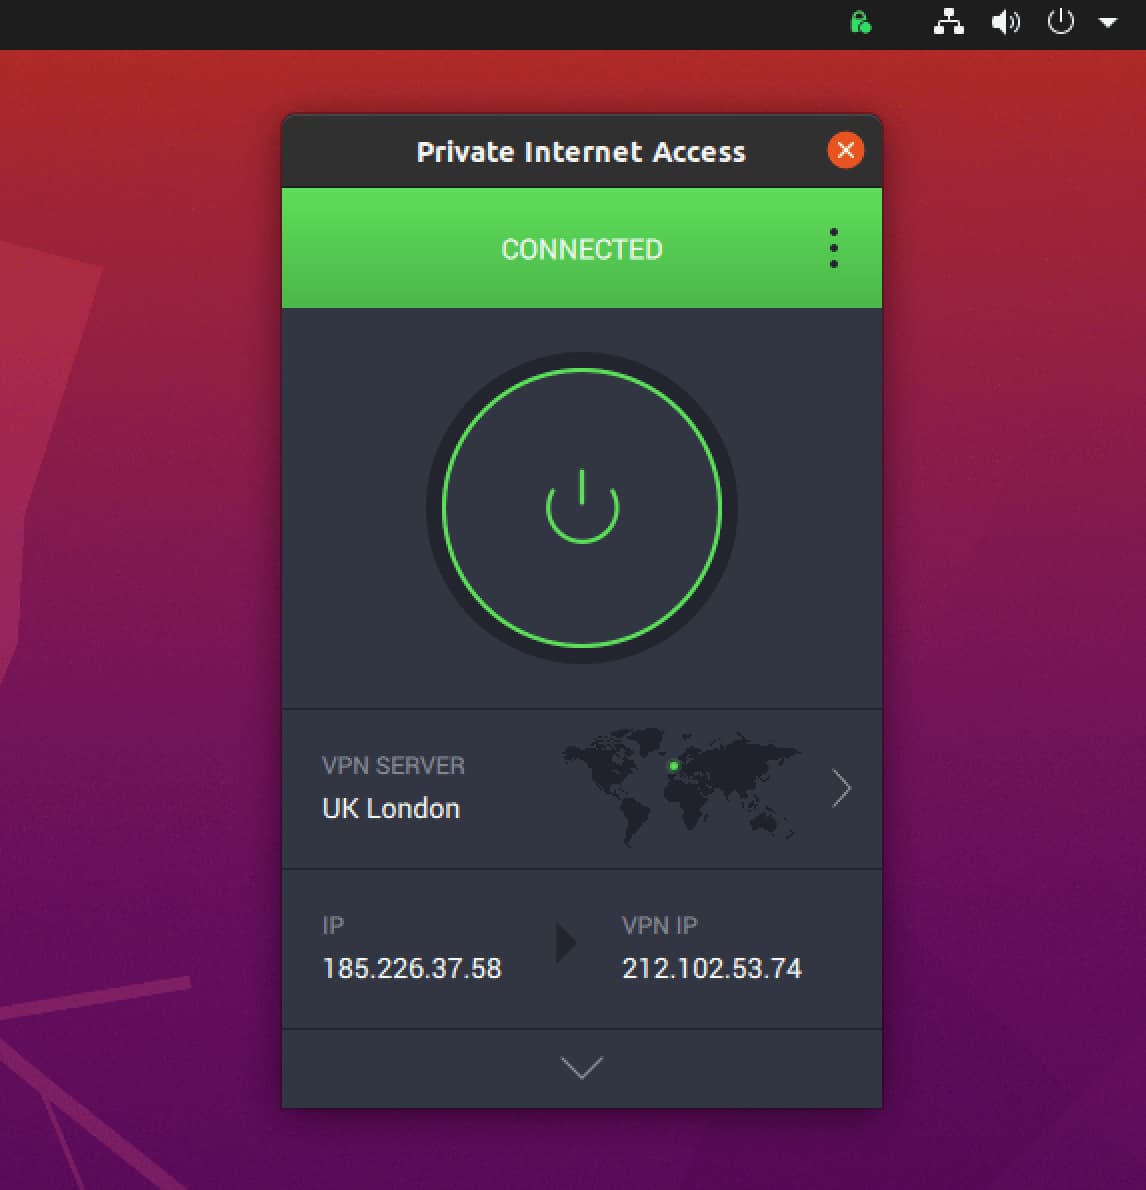 Private Internet Access VPN app home screen on Linux